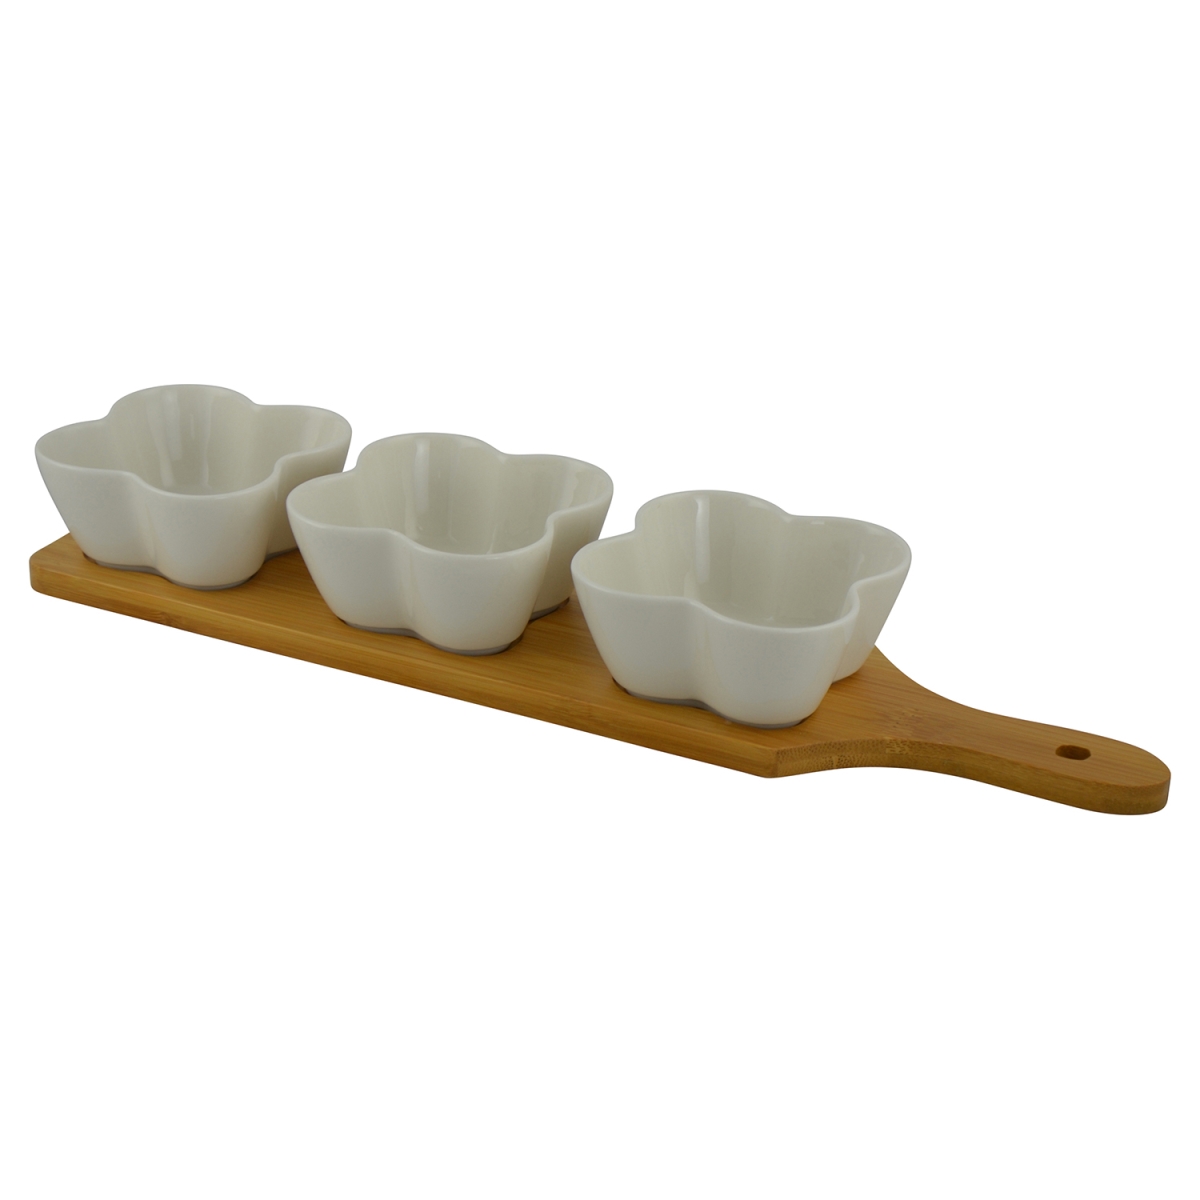 Picture of Three Star KW260 15 x 4 x 2 in. 4-Sided Bowl - 3 Piece